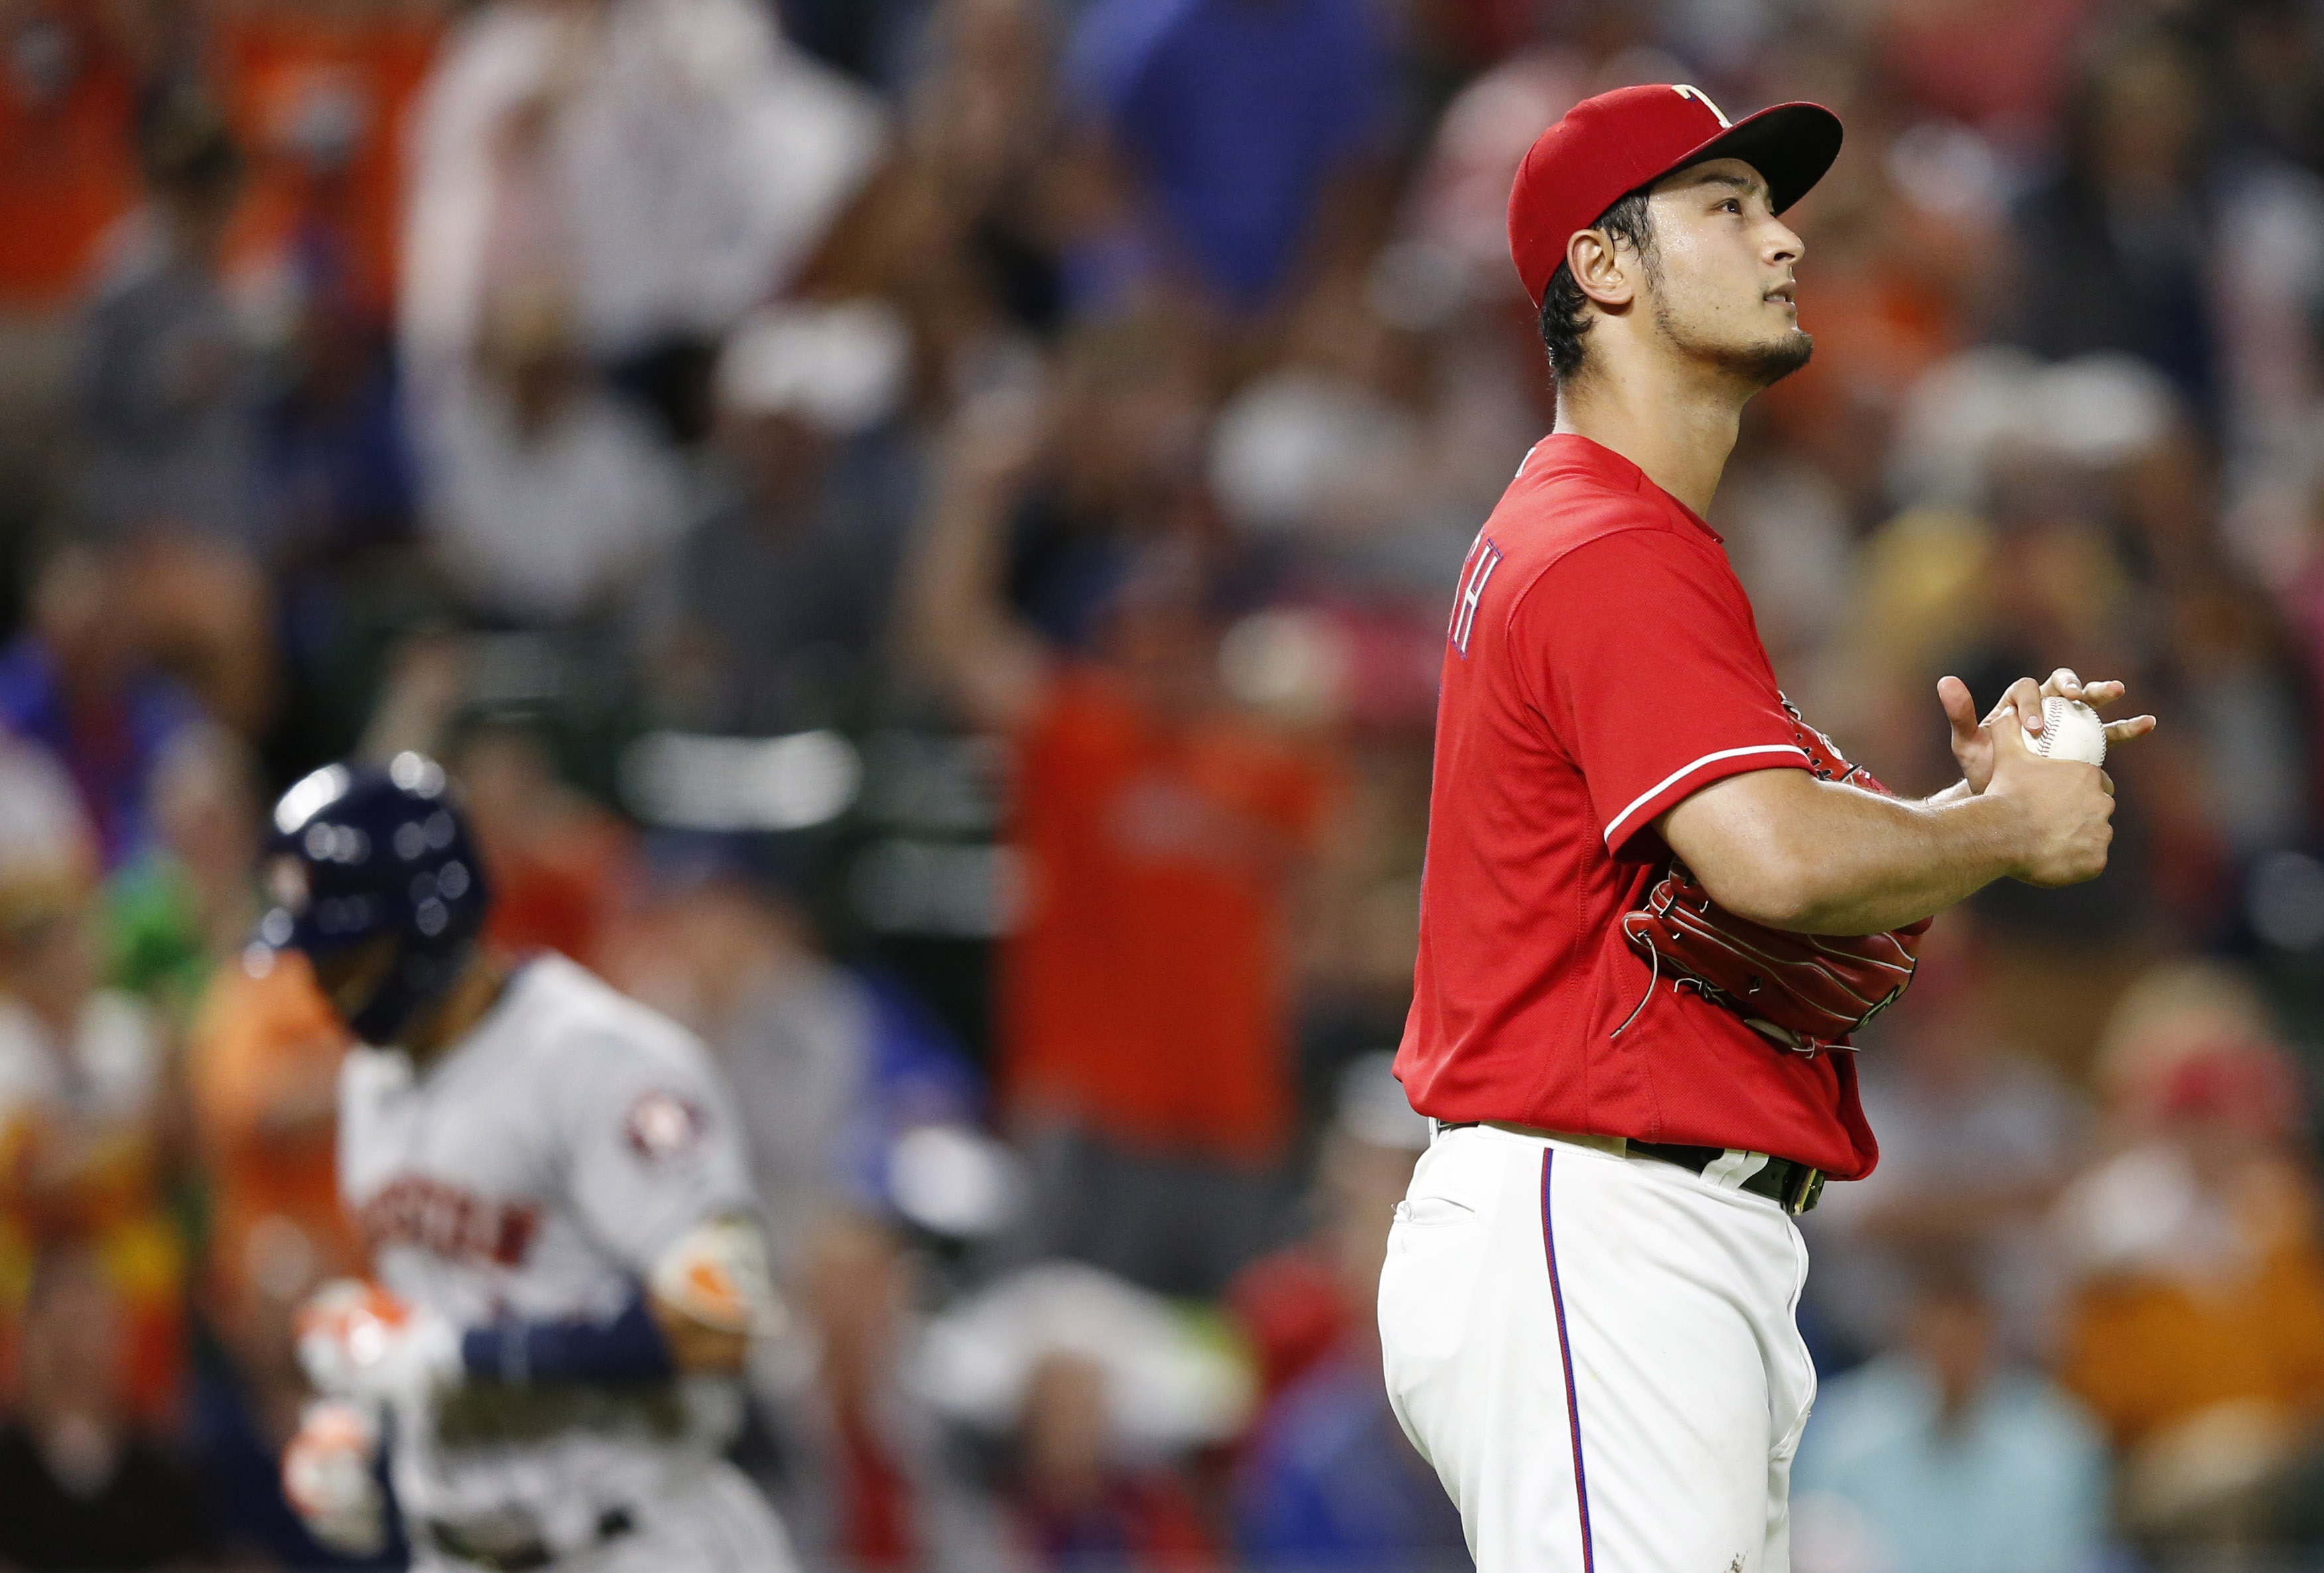 Sources: Rangers are gauging Yu Darvish packages prior to trade